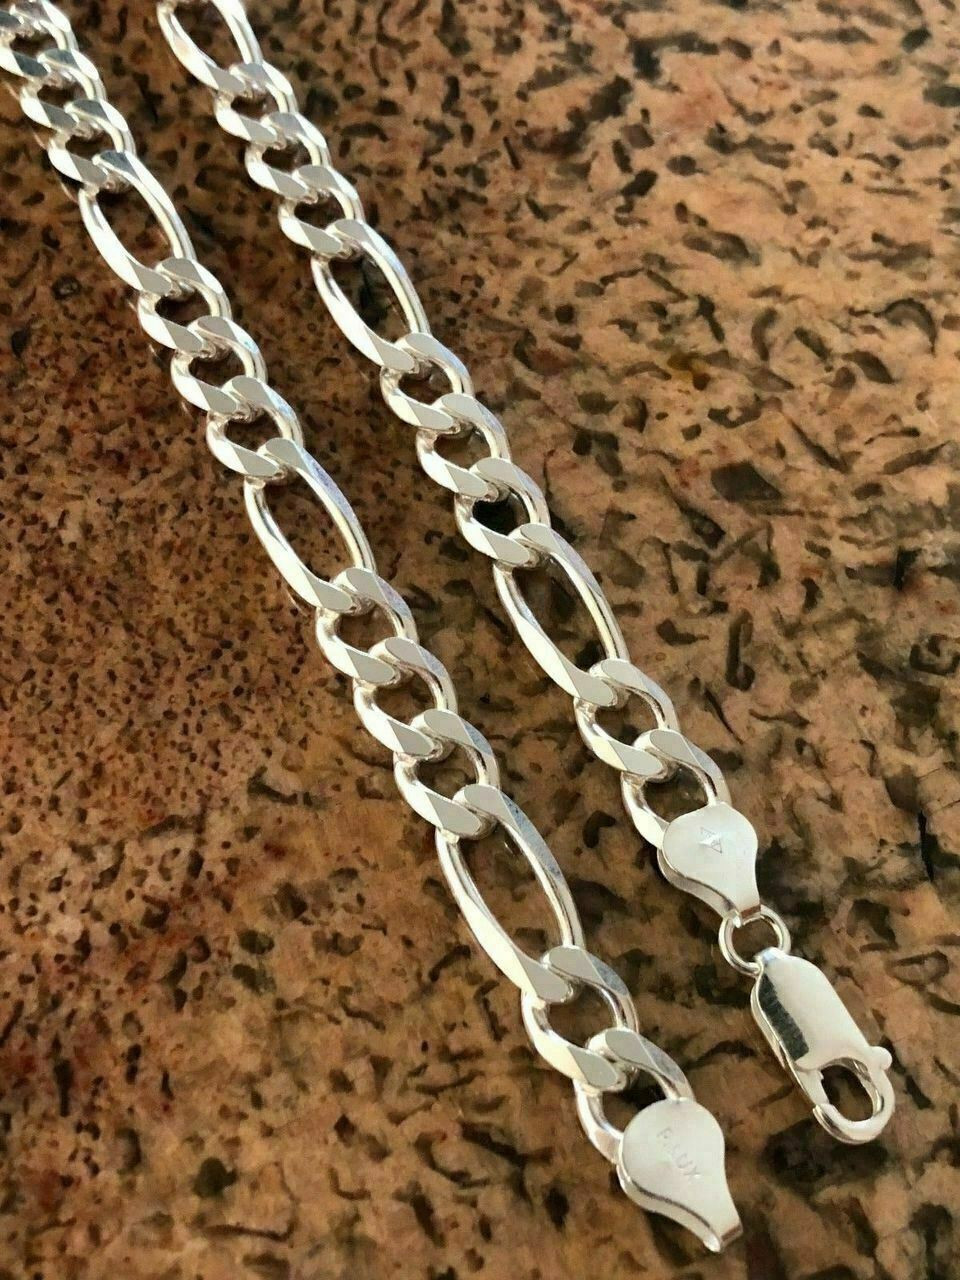 Men's Sterling Silver Necklace, 22 8mm Figaro Chain